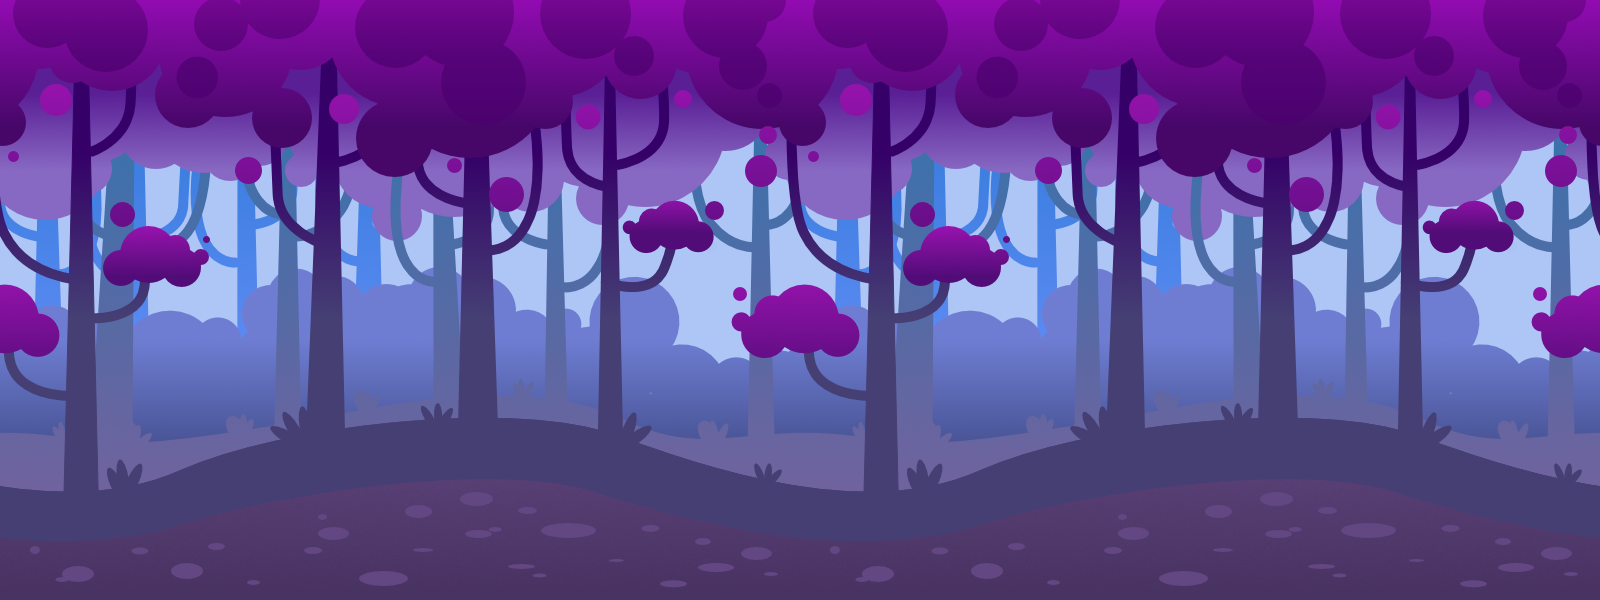 forest sidescroll background